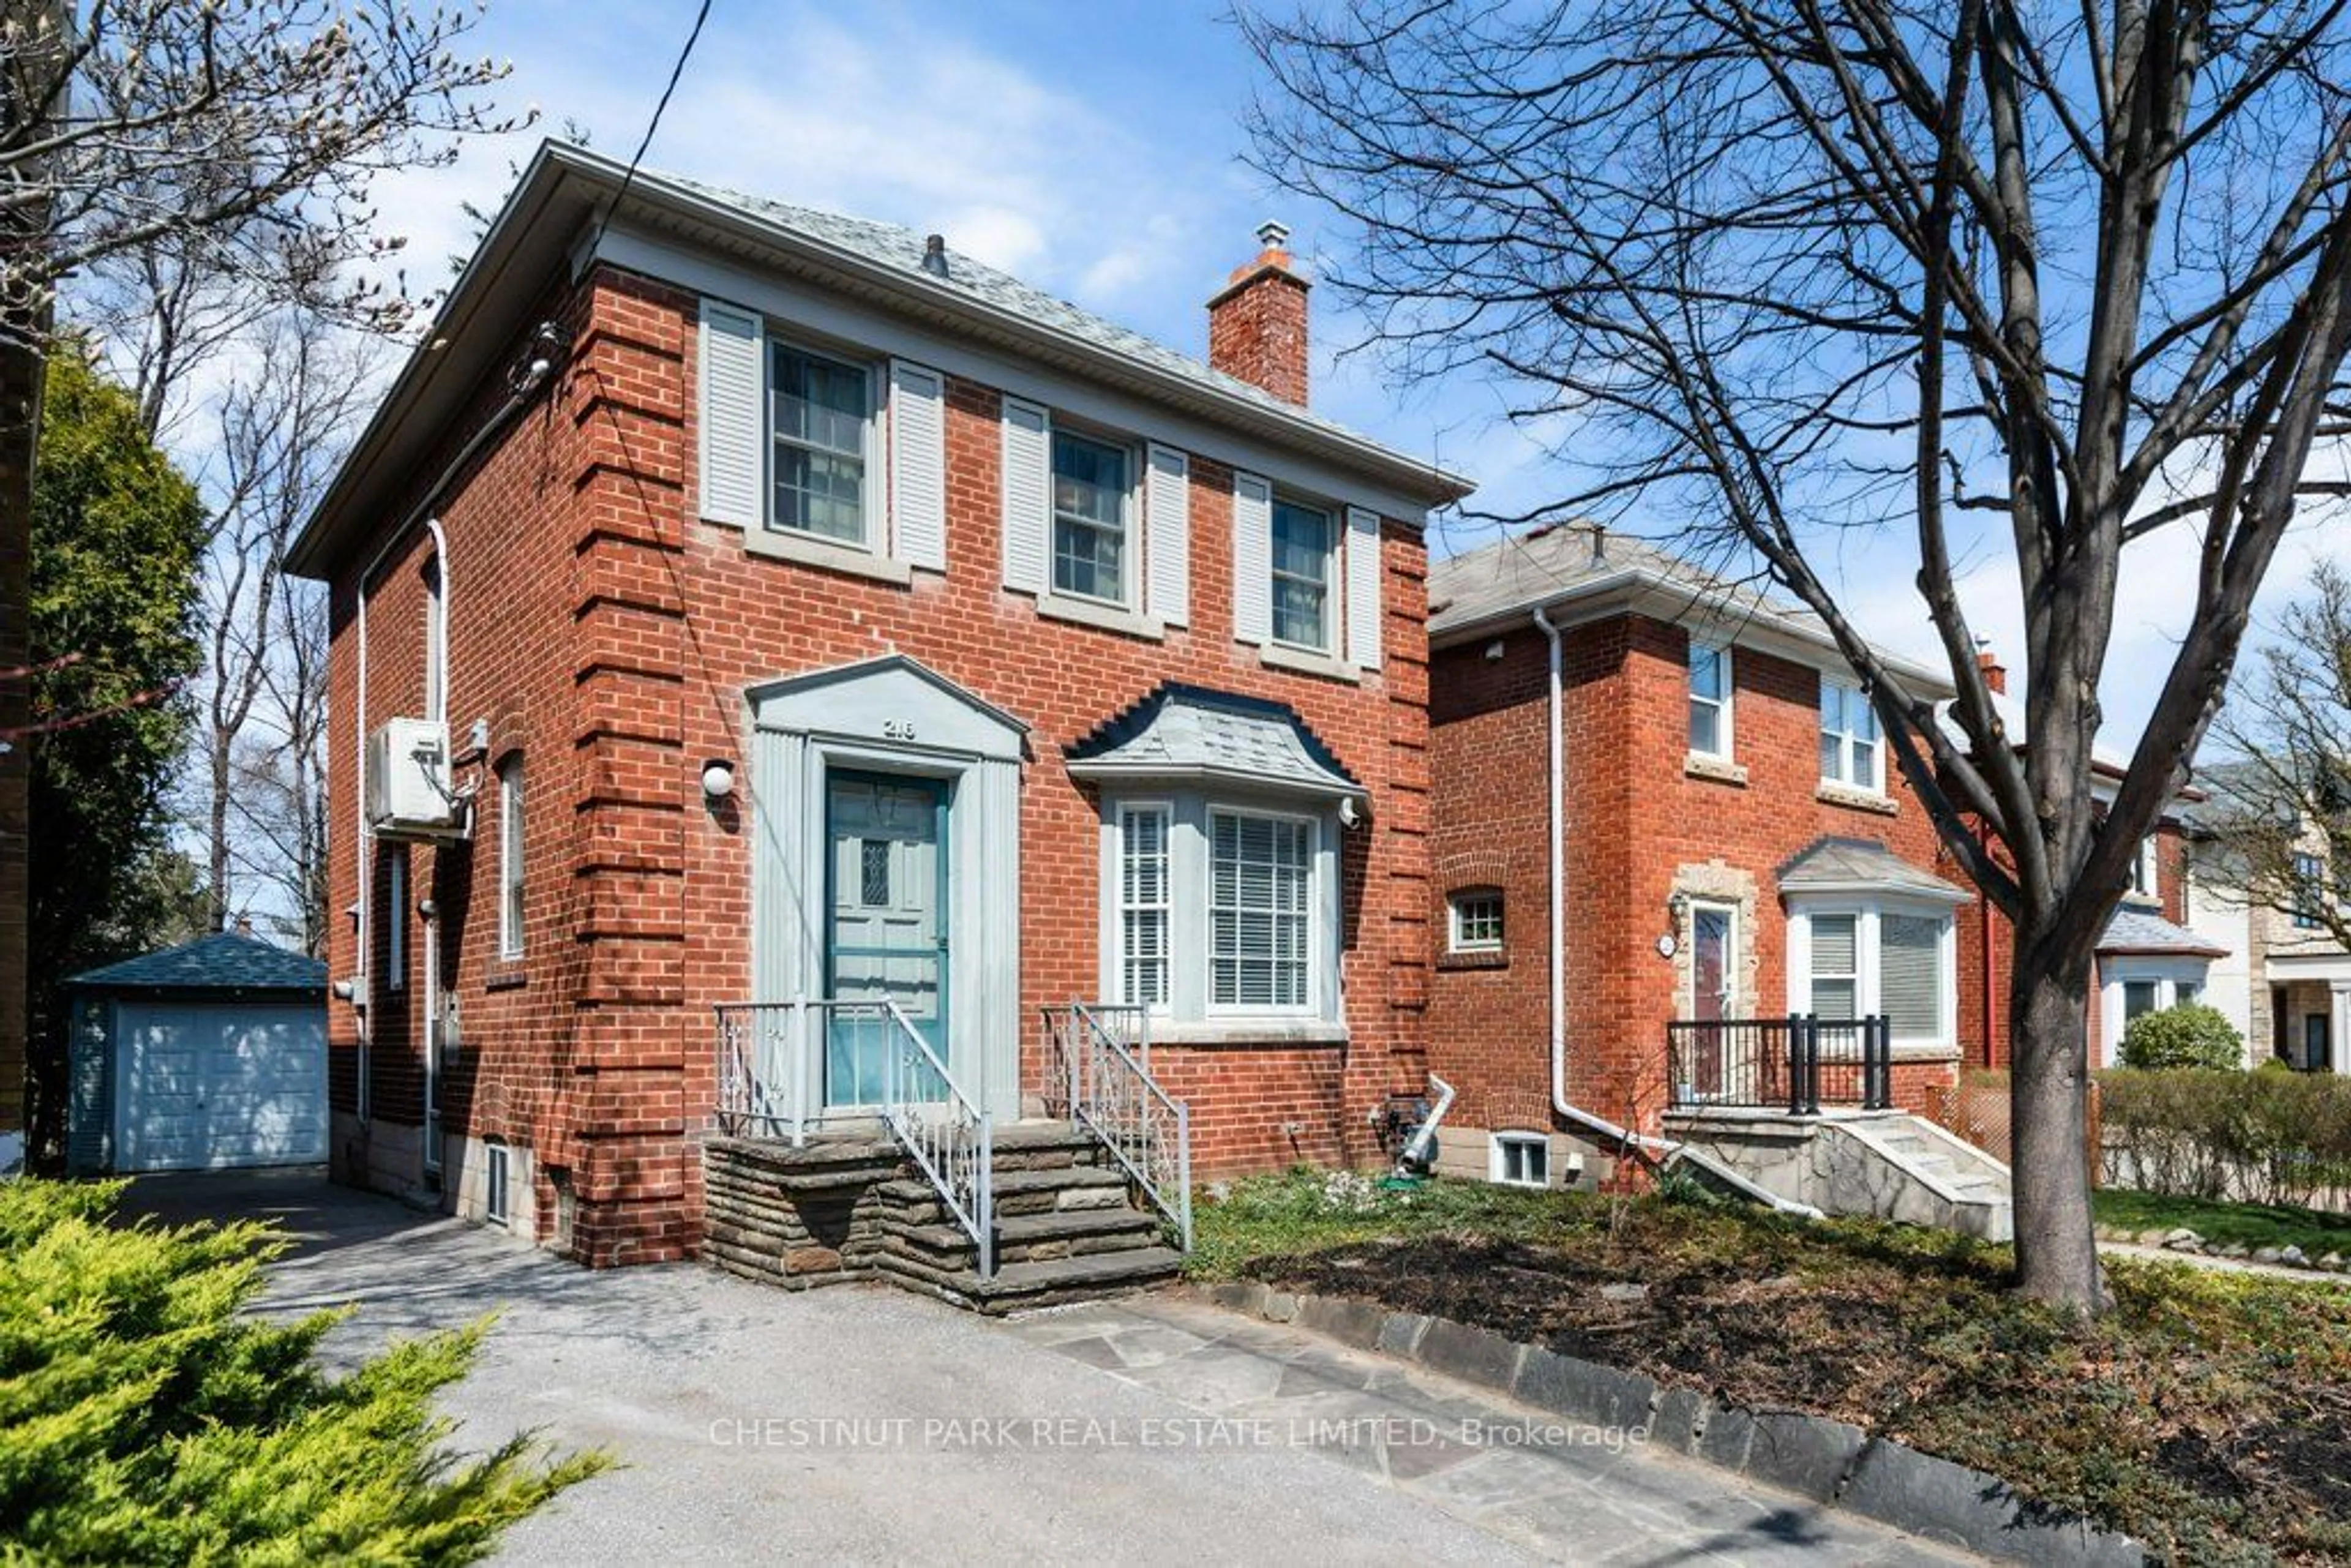 Home with brick exterior material for 218 Lawrence Ave, Toronto Ontario M4N 1T2